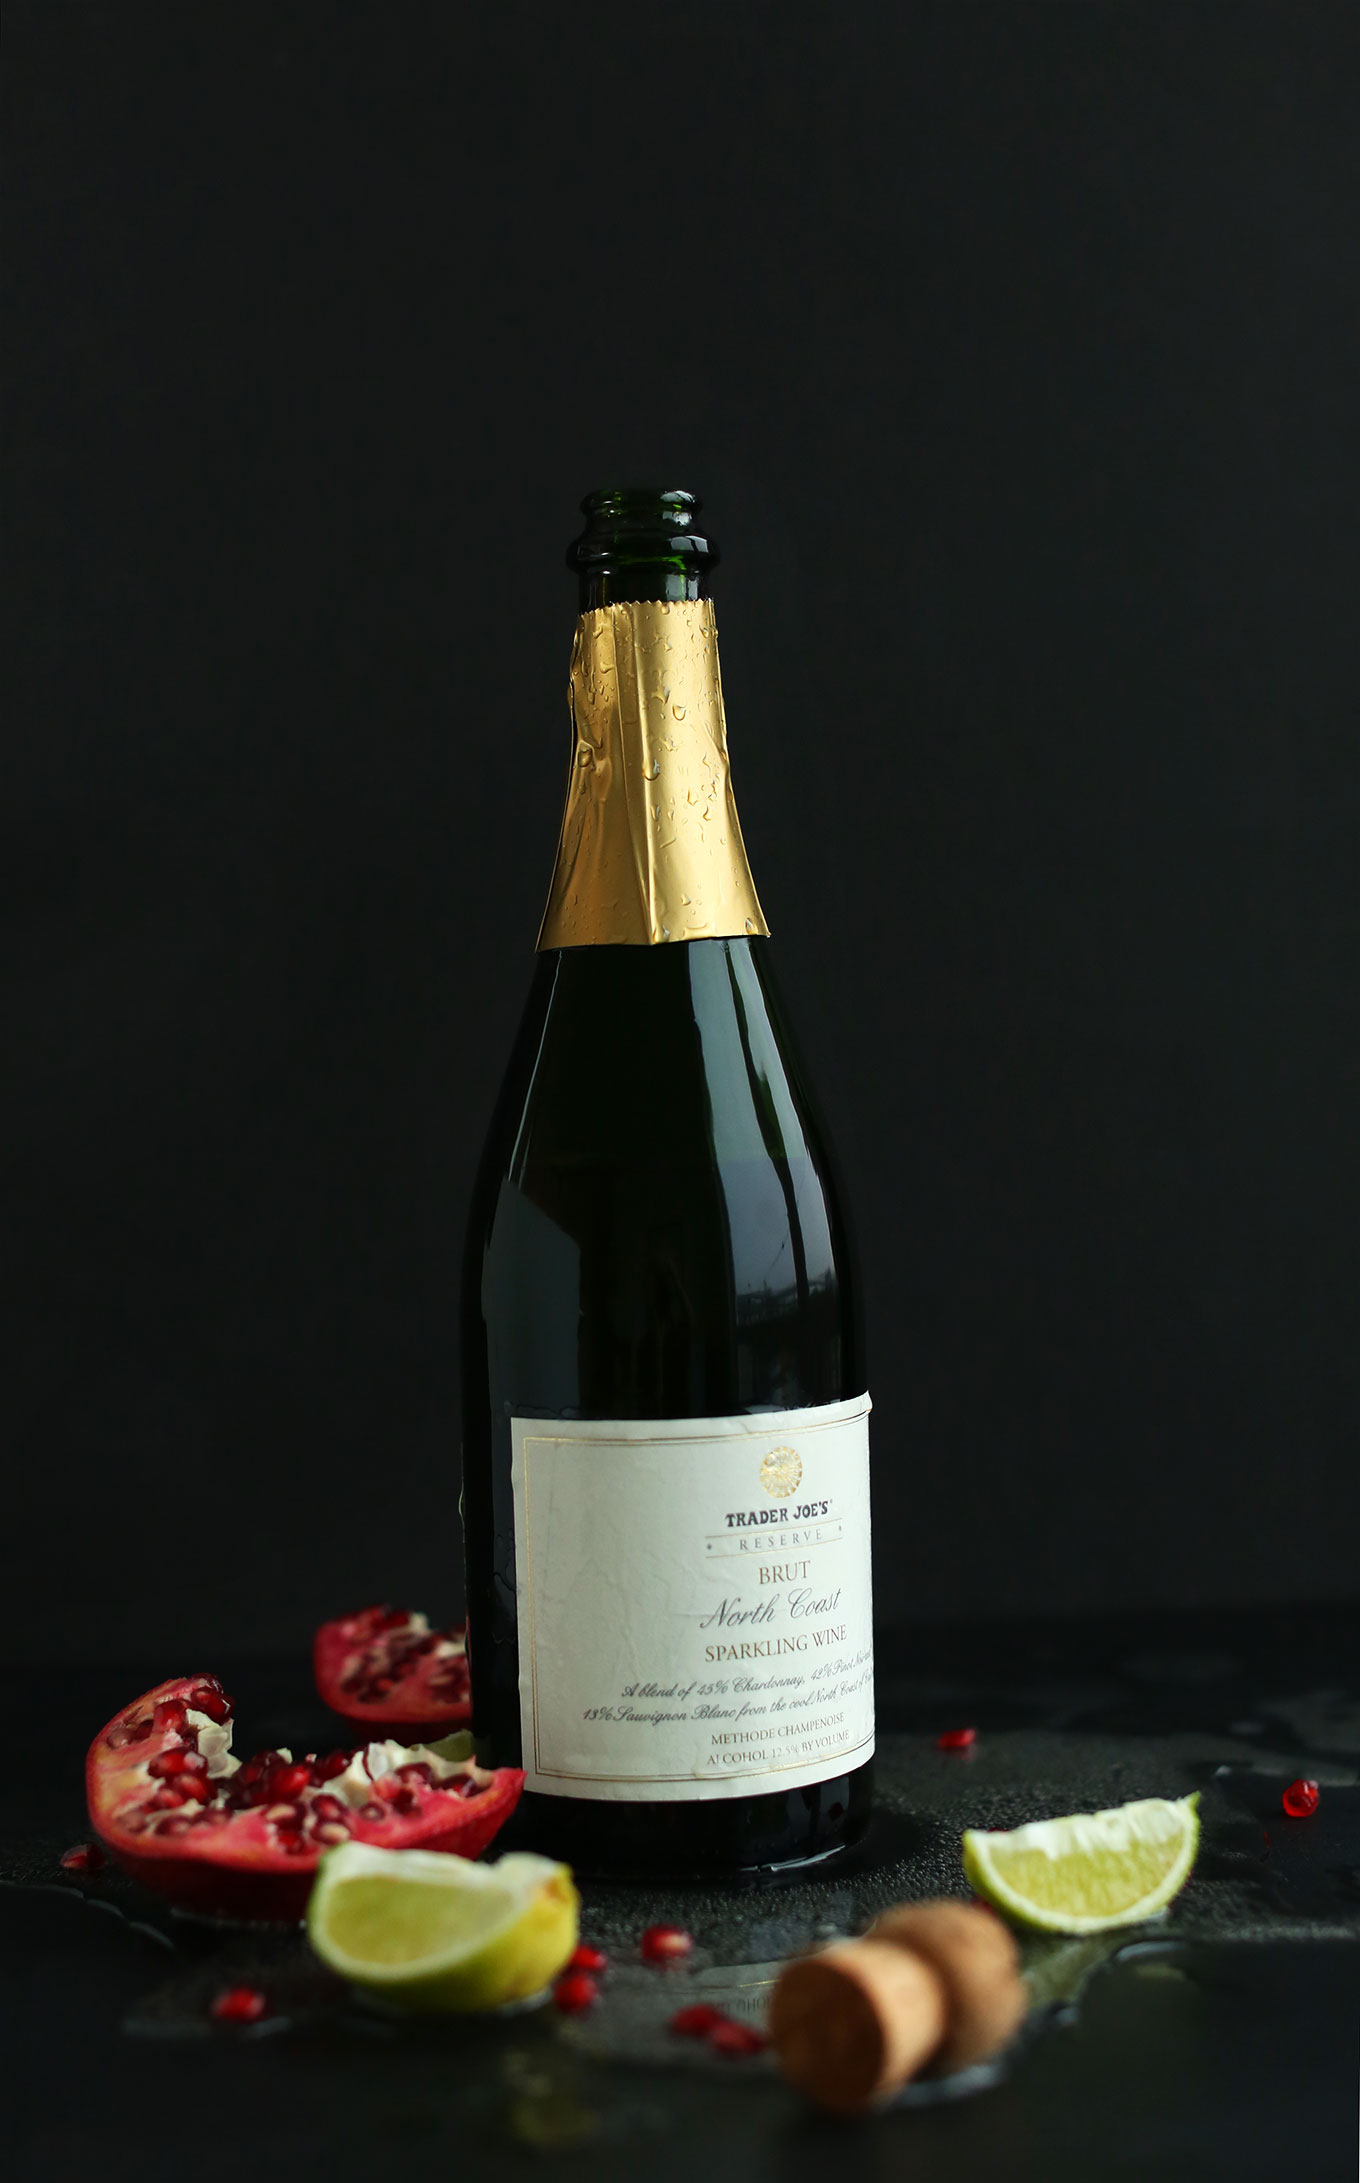 Bottle of champagne surrounded by fresh fruit of making a New Year's drink recipe